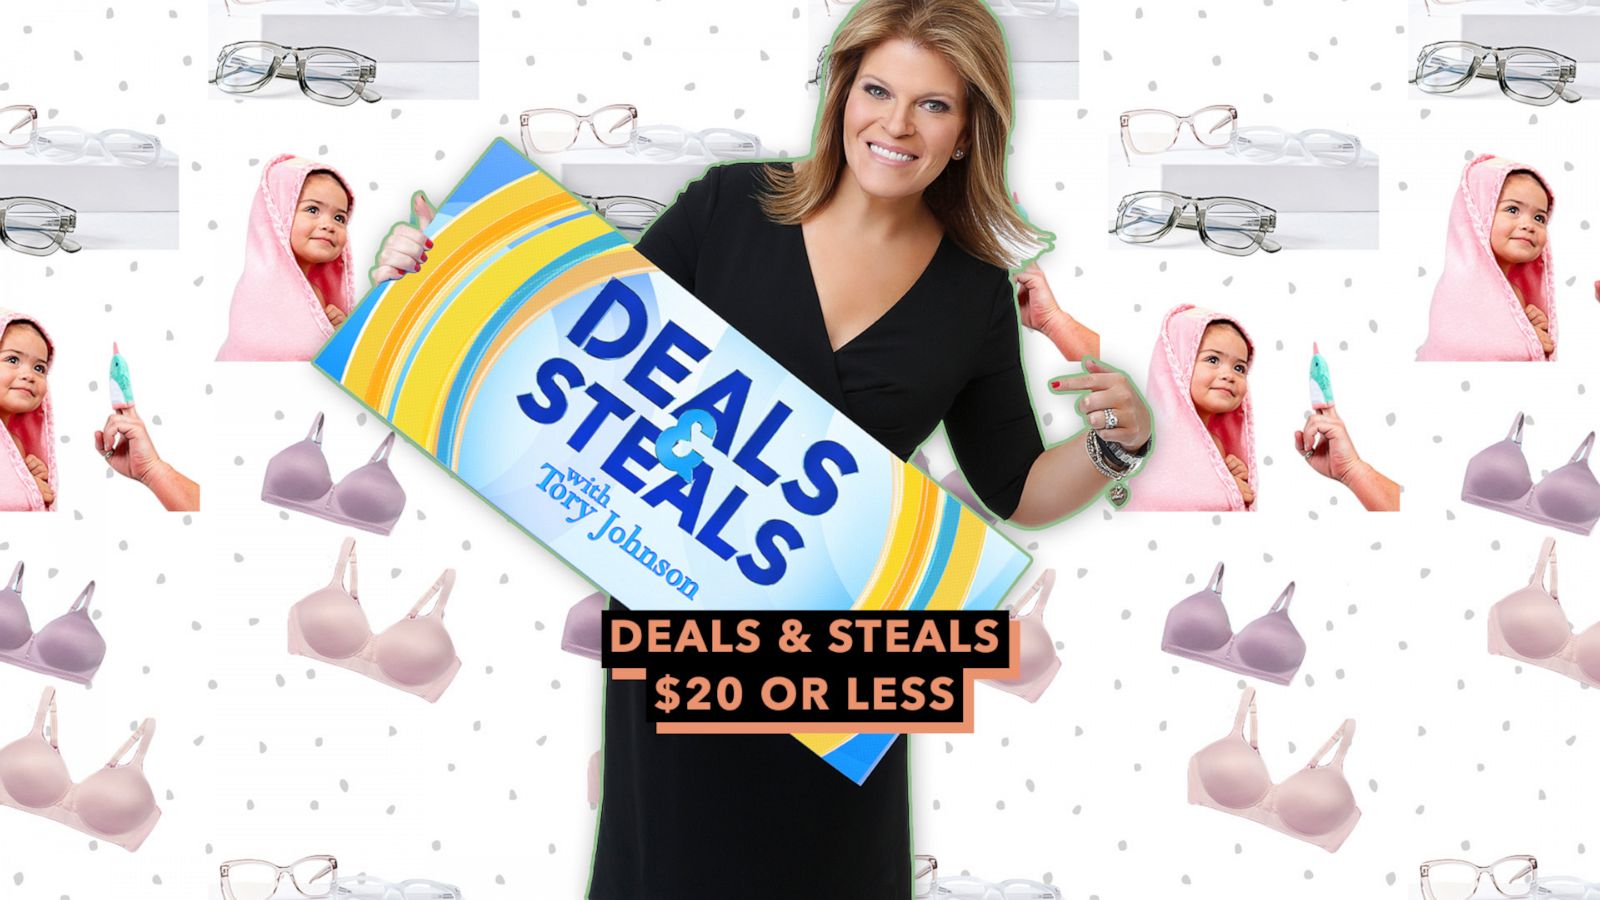 GMA' Deals & Steals $20 or less - Good Morning America